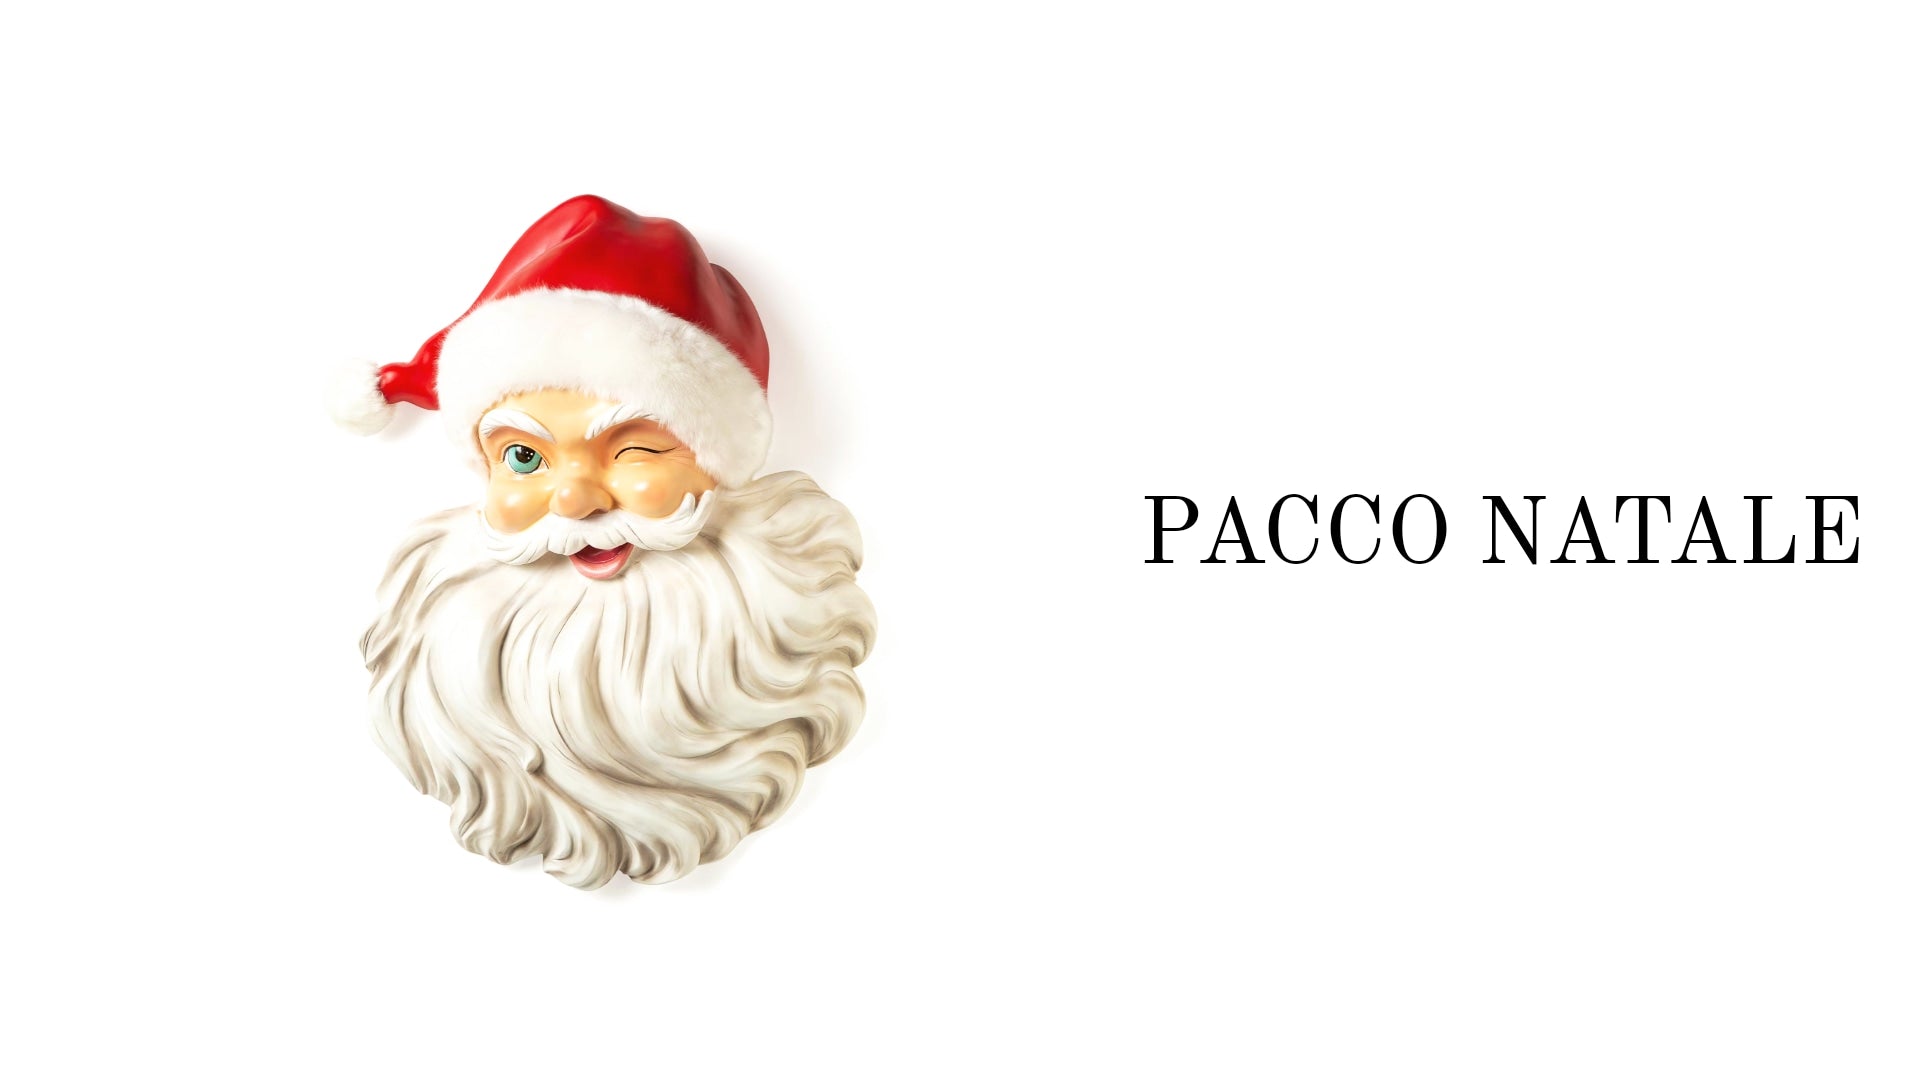 Pacco Natale